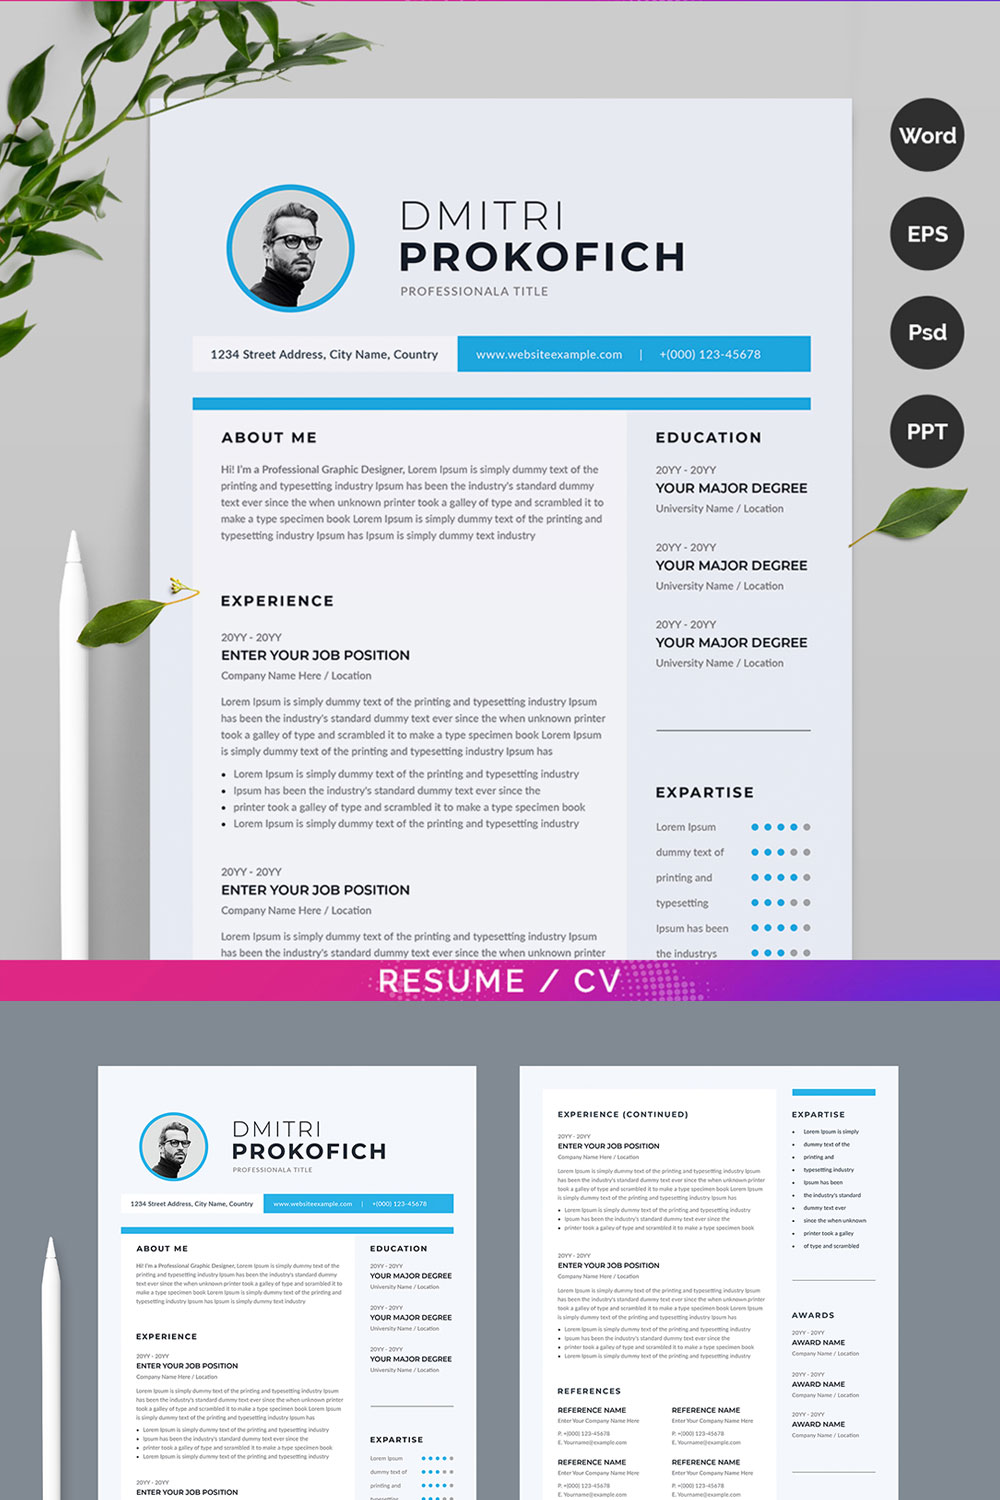 Clean and professional resume template with a blue and white color scheme.